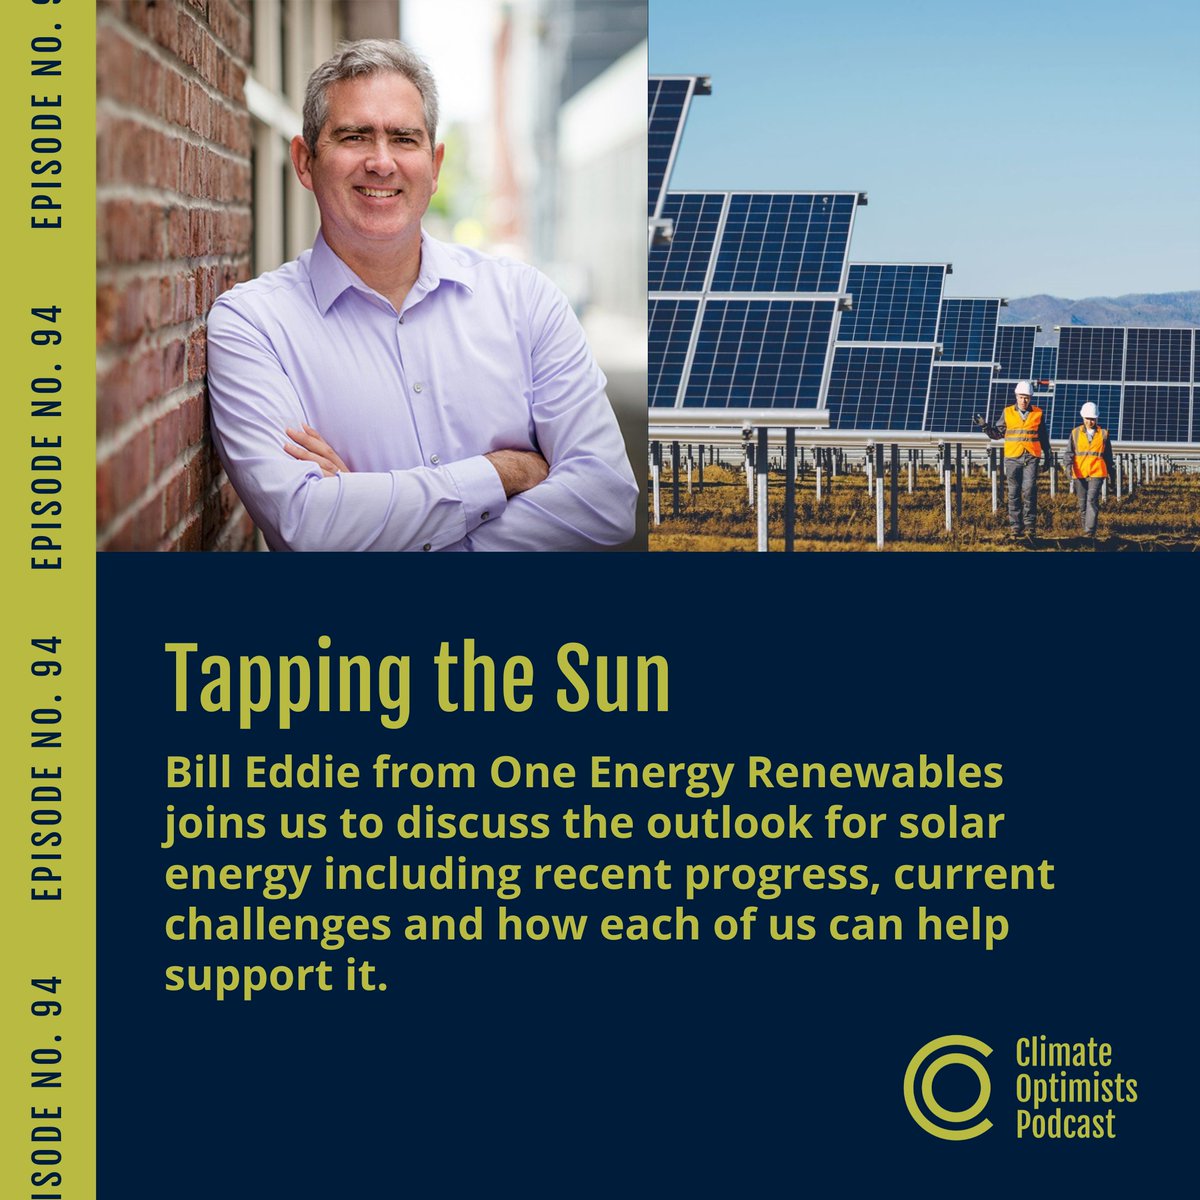 The newest episode is out! Check it out! #climateoptimists #climatechange #solarenergy #renewables #podcast #happy #hopeful #sun